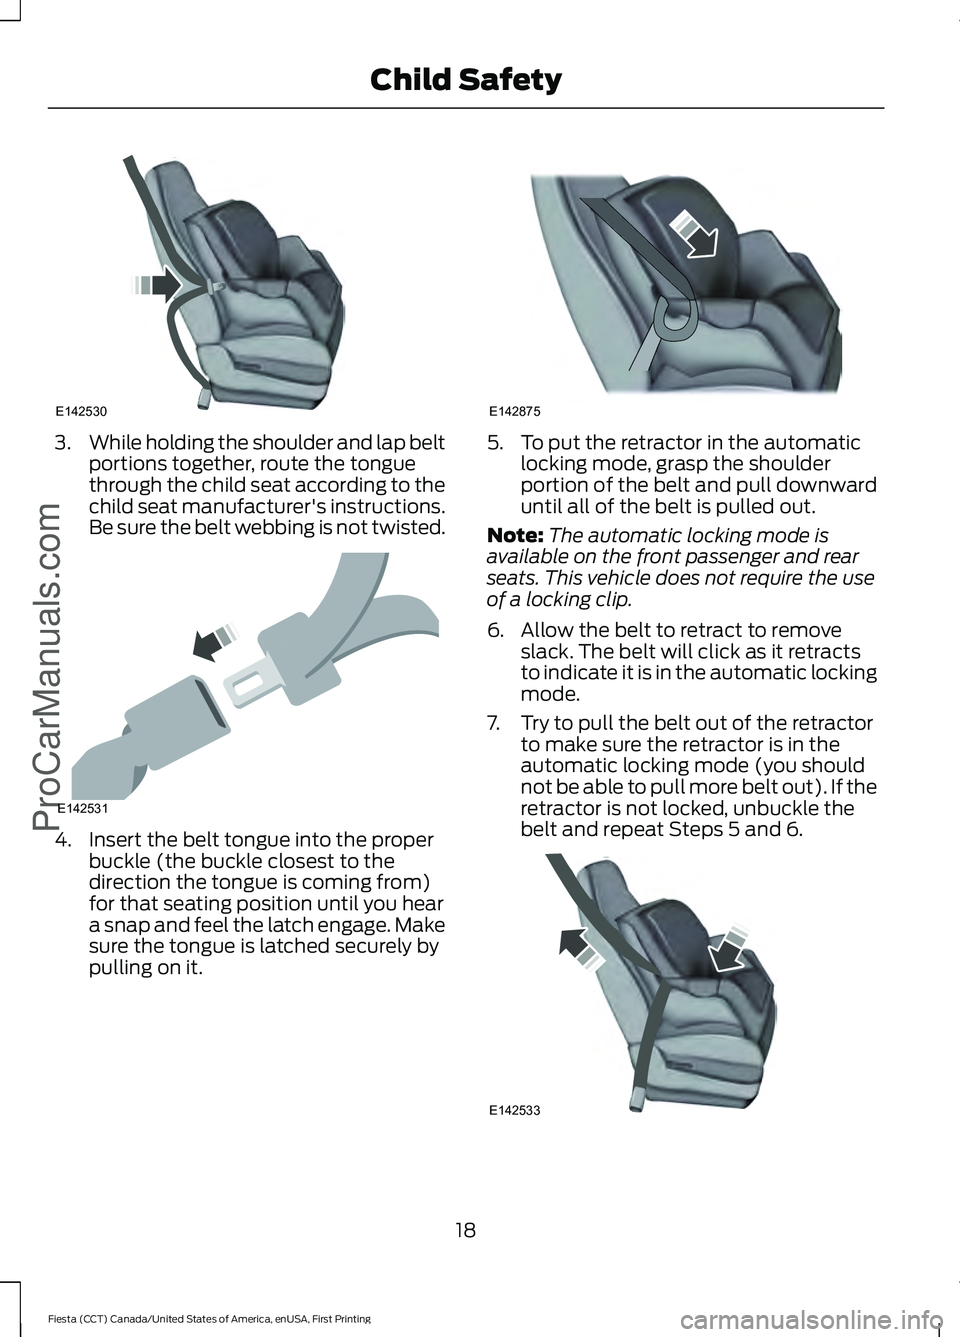 FORD FIESTA 2016  Owners Manual 3.
While holding the shoulder and lap belt
portions together, route the tongue
through the child seat according to the
child seat manufacturer's instructions.
Be sure the belt webbing is not twist